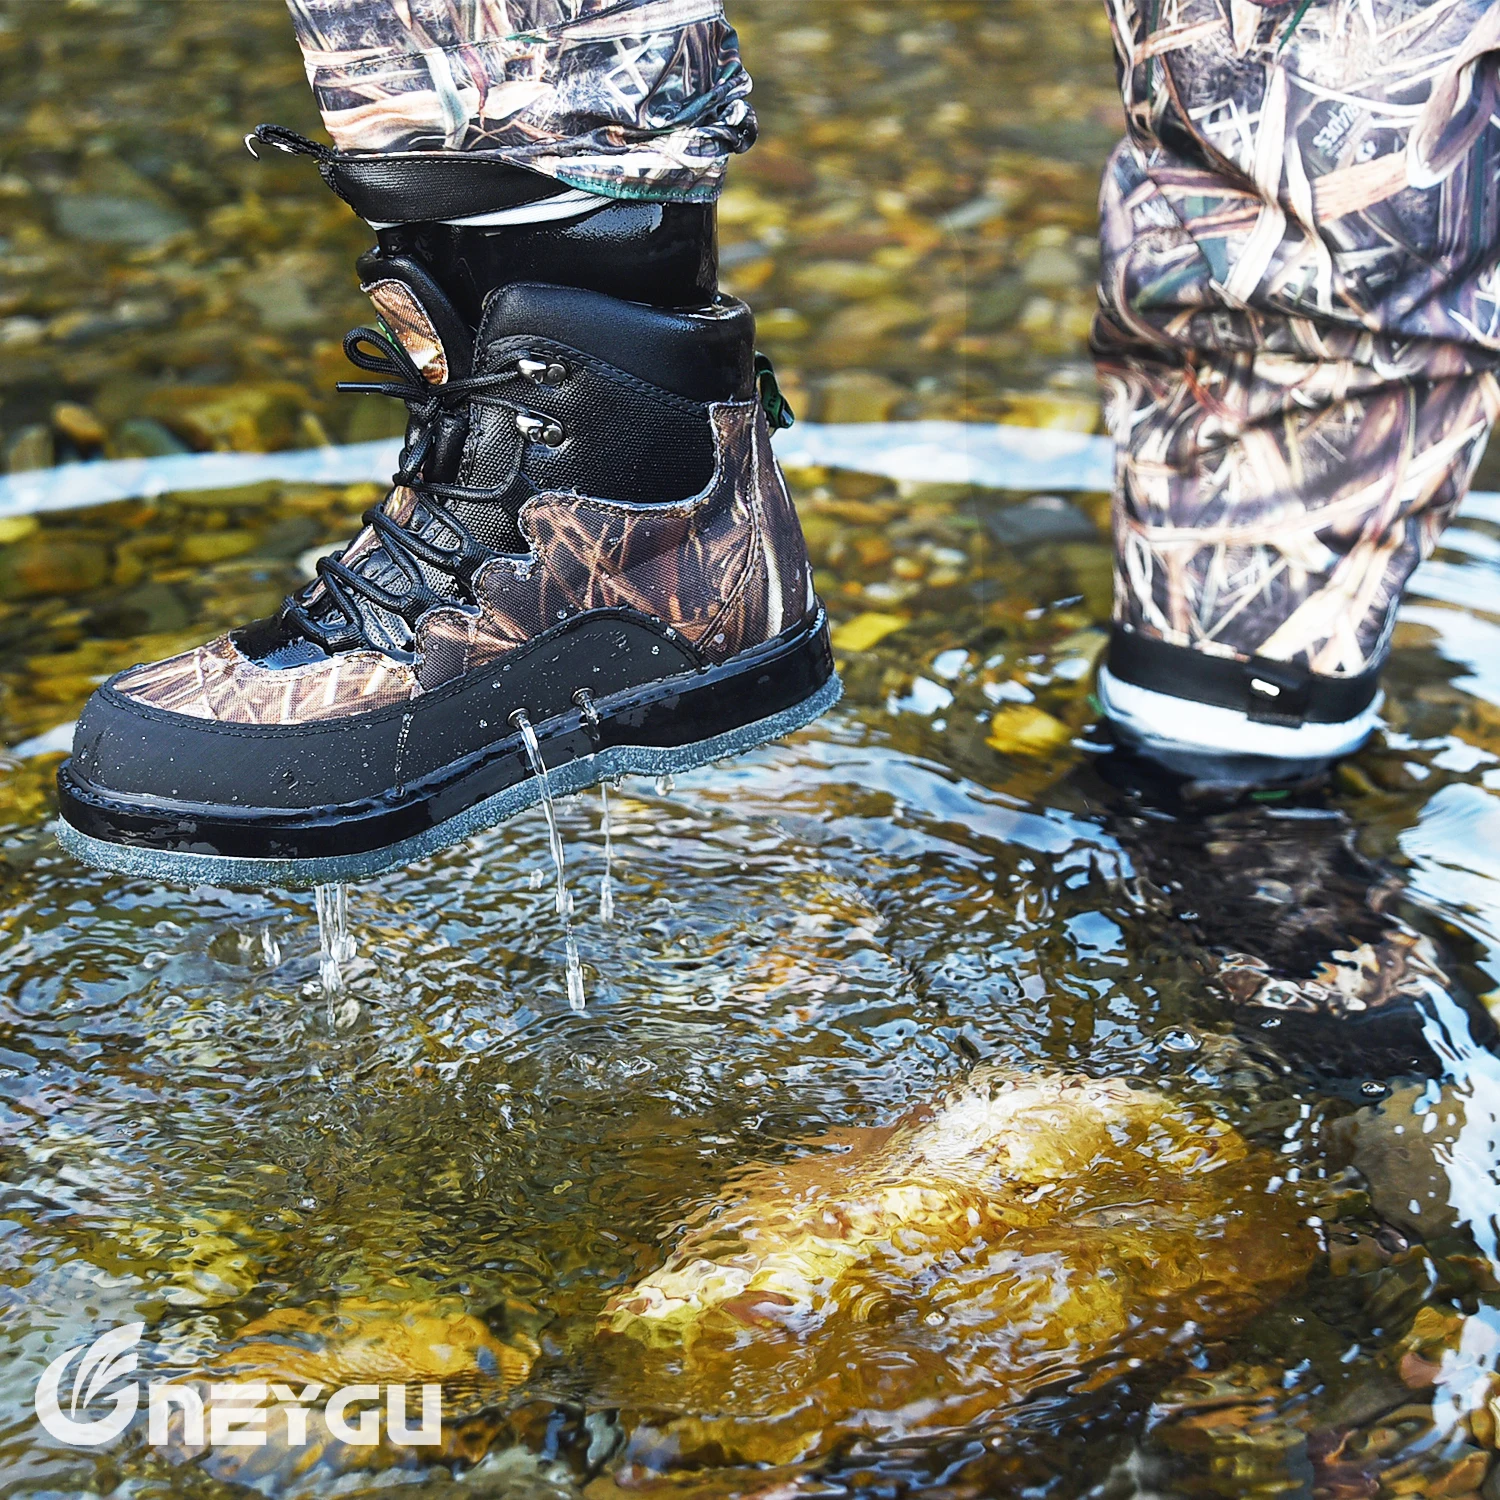 NEYGU fly fishing camo wading boots , wader shoes for hunting with